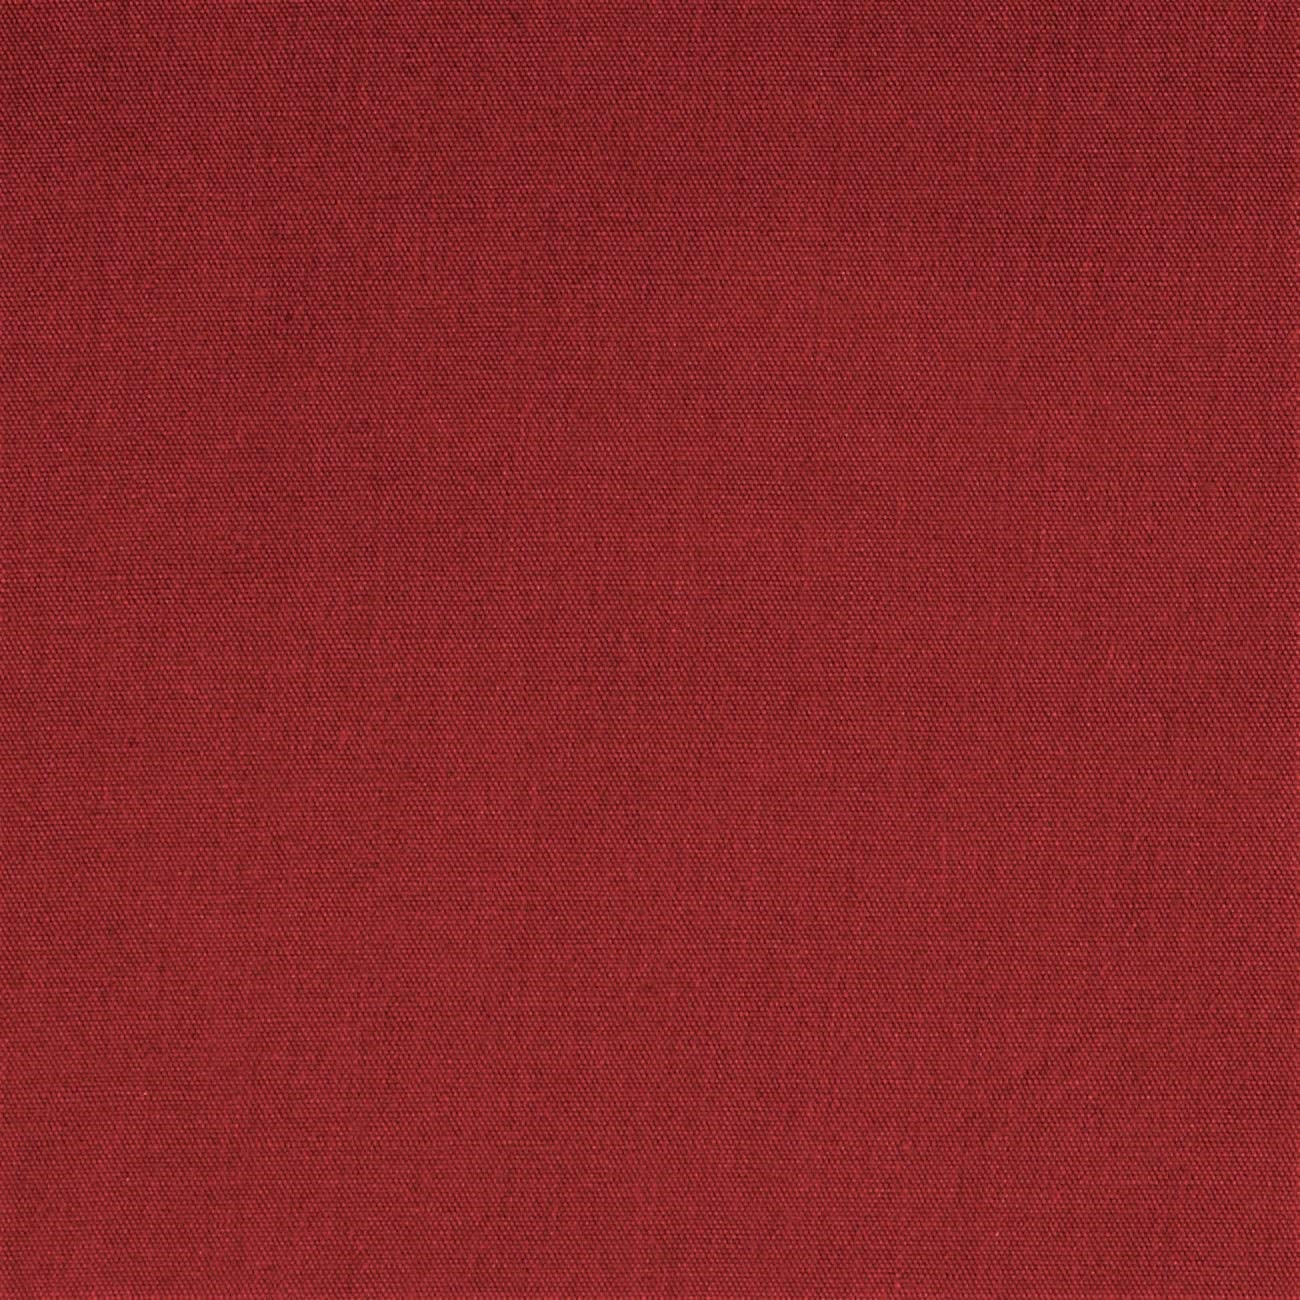 Premium Light Weight Poly Cotton Blend Broadcloth Fabric, Good to Make Face Mask Fabric (Cranberry, 1 Yard)